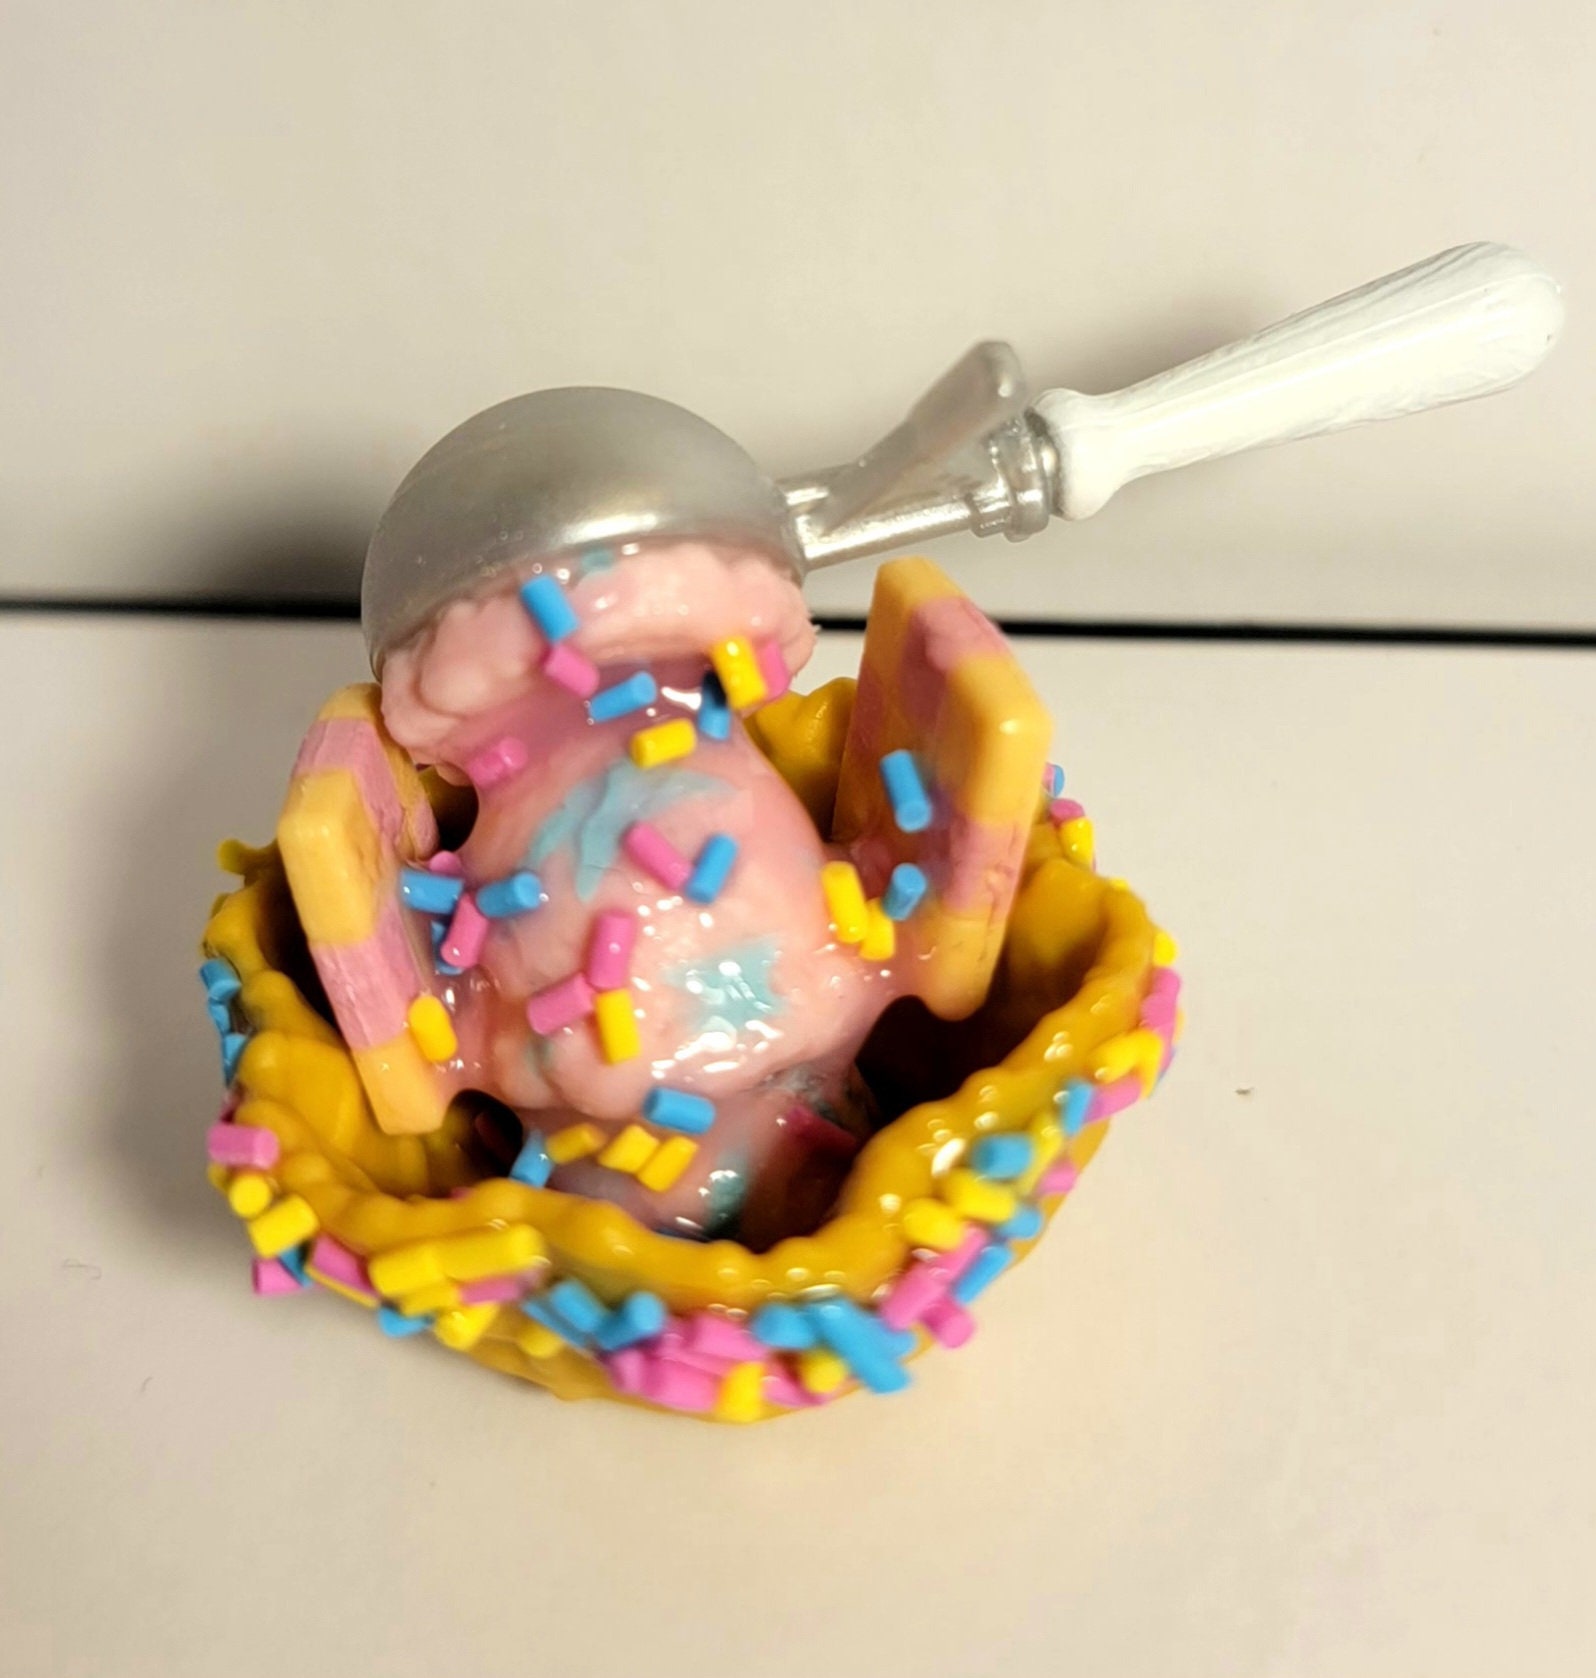 12 Sweet Supplies for an Ice Cream-Themed Shavuot